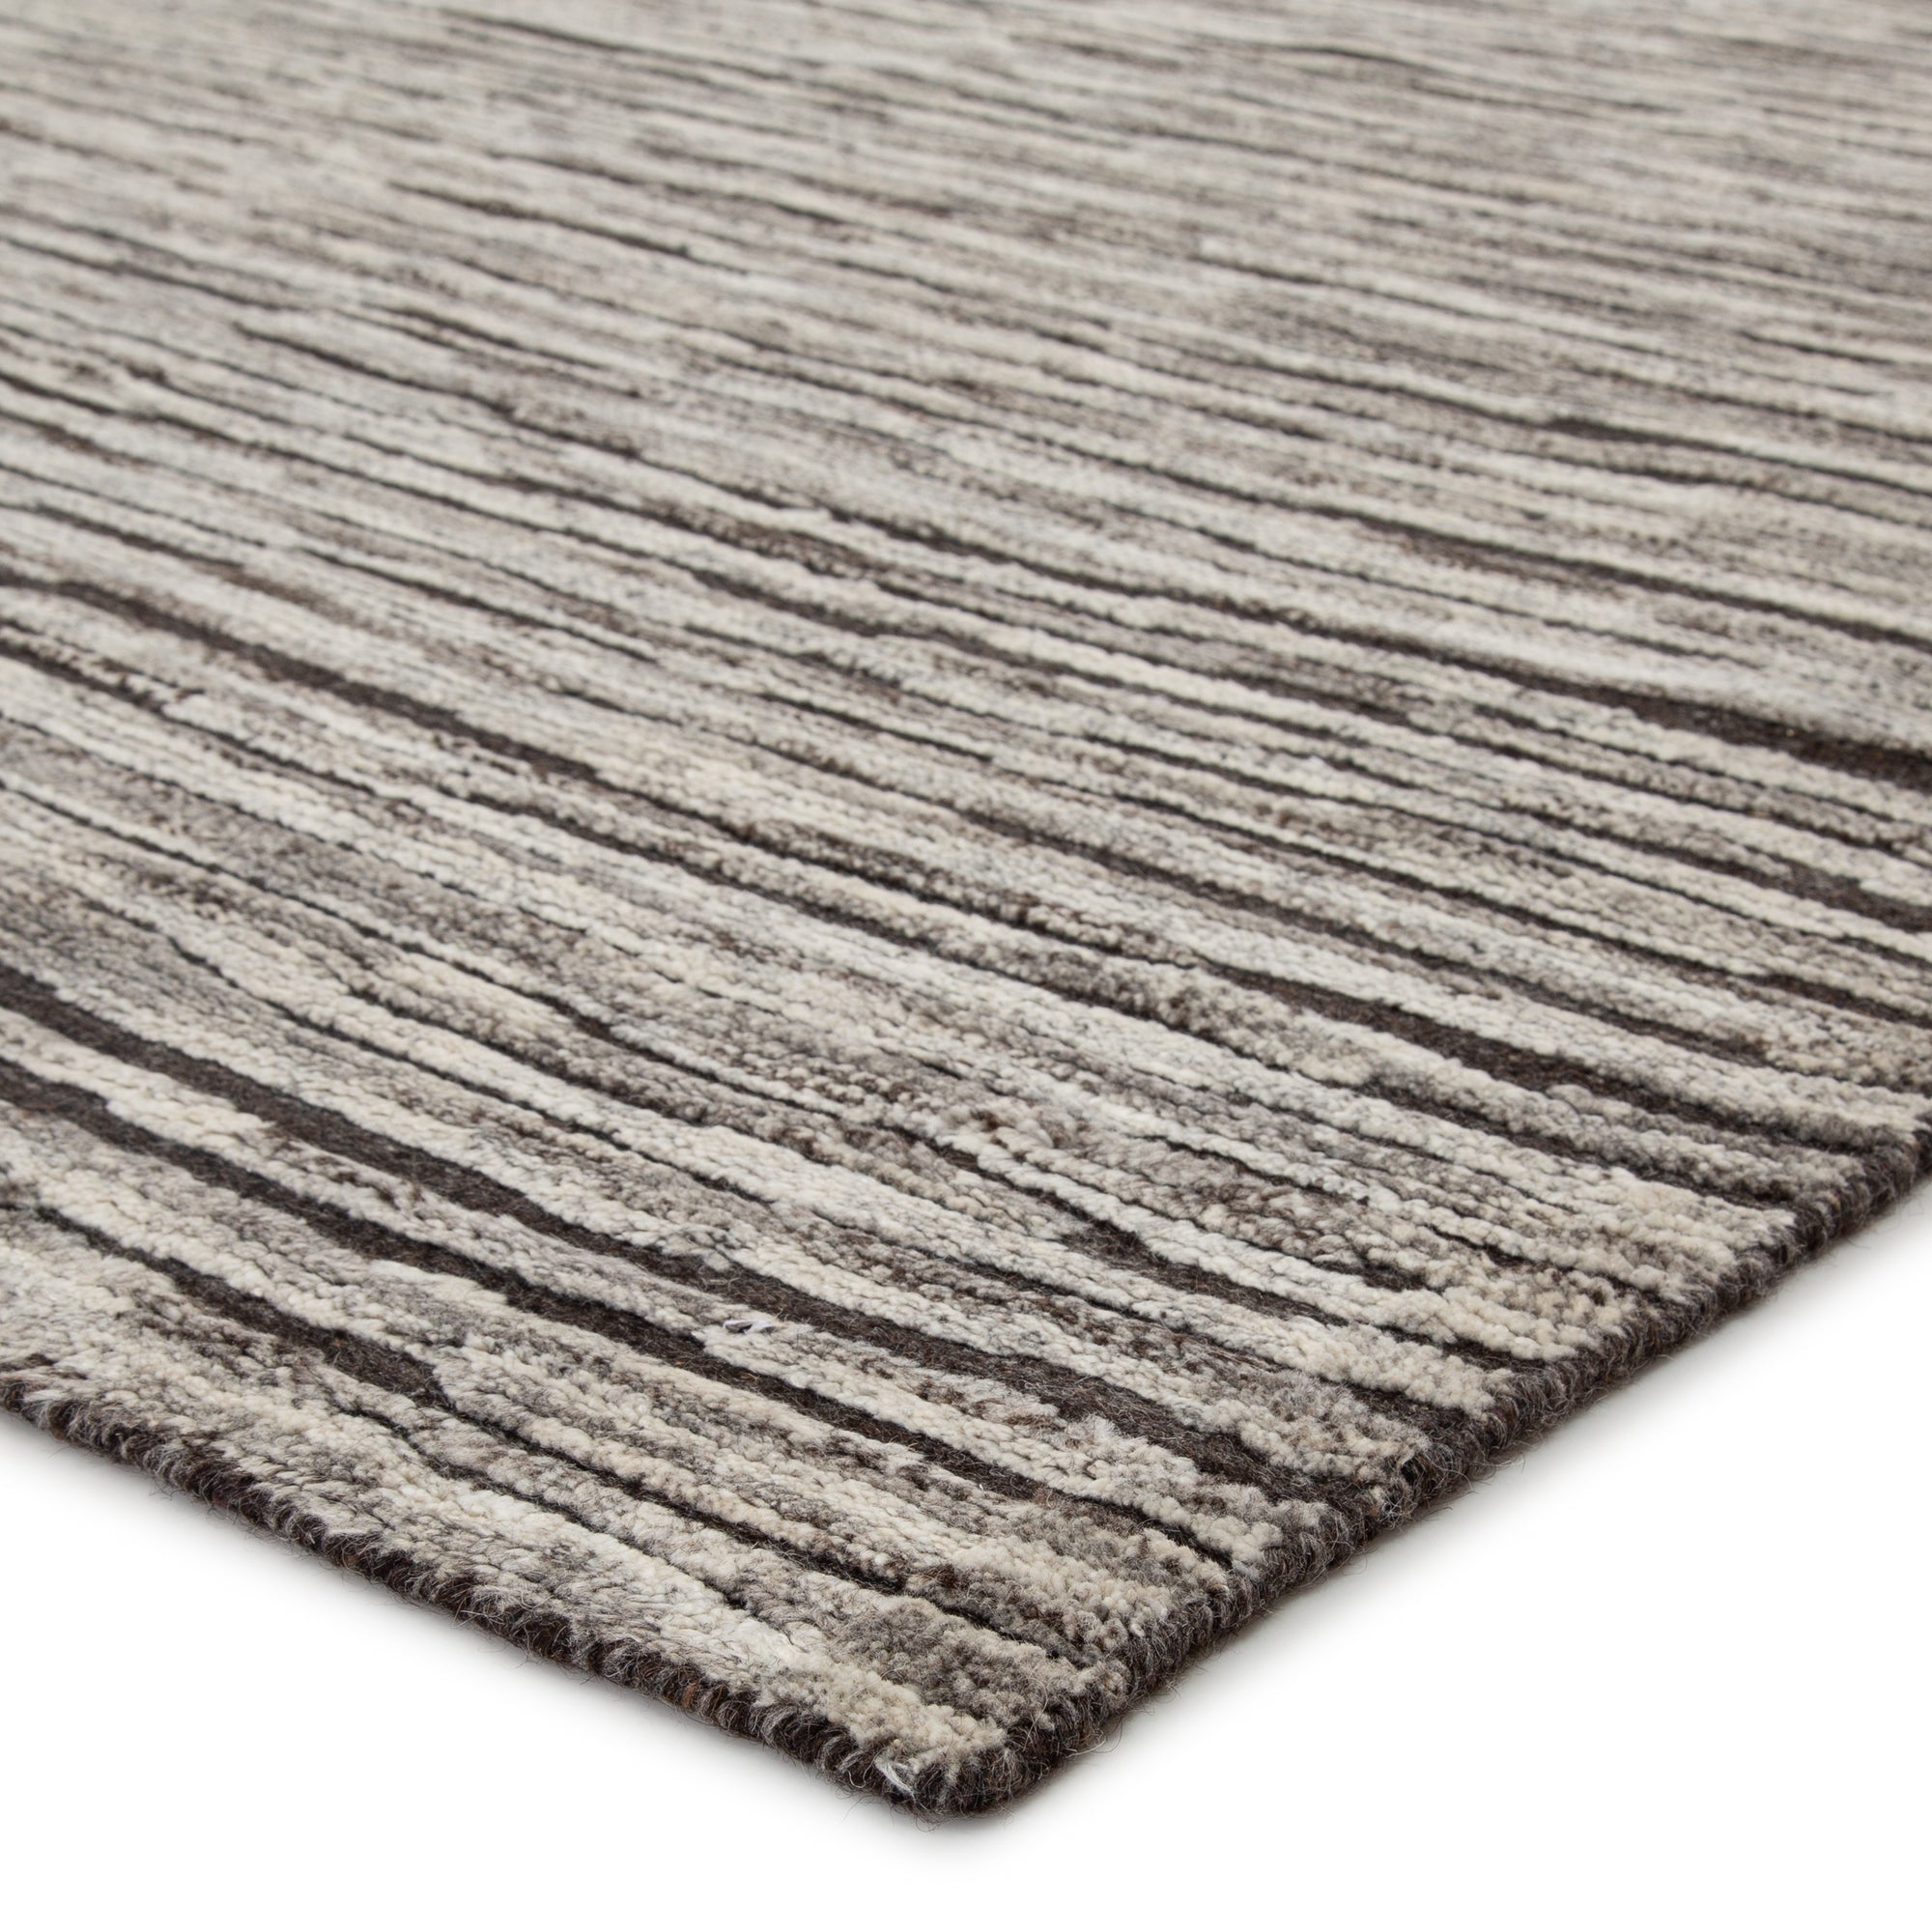 Rugs by Roo | Jaipur Living Ramsay Hand-Knotted Striped Dark Gray Ivory Area Rug-RUG144939